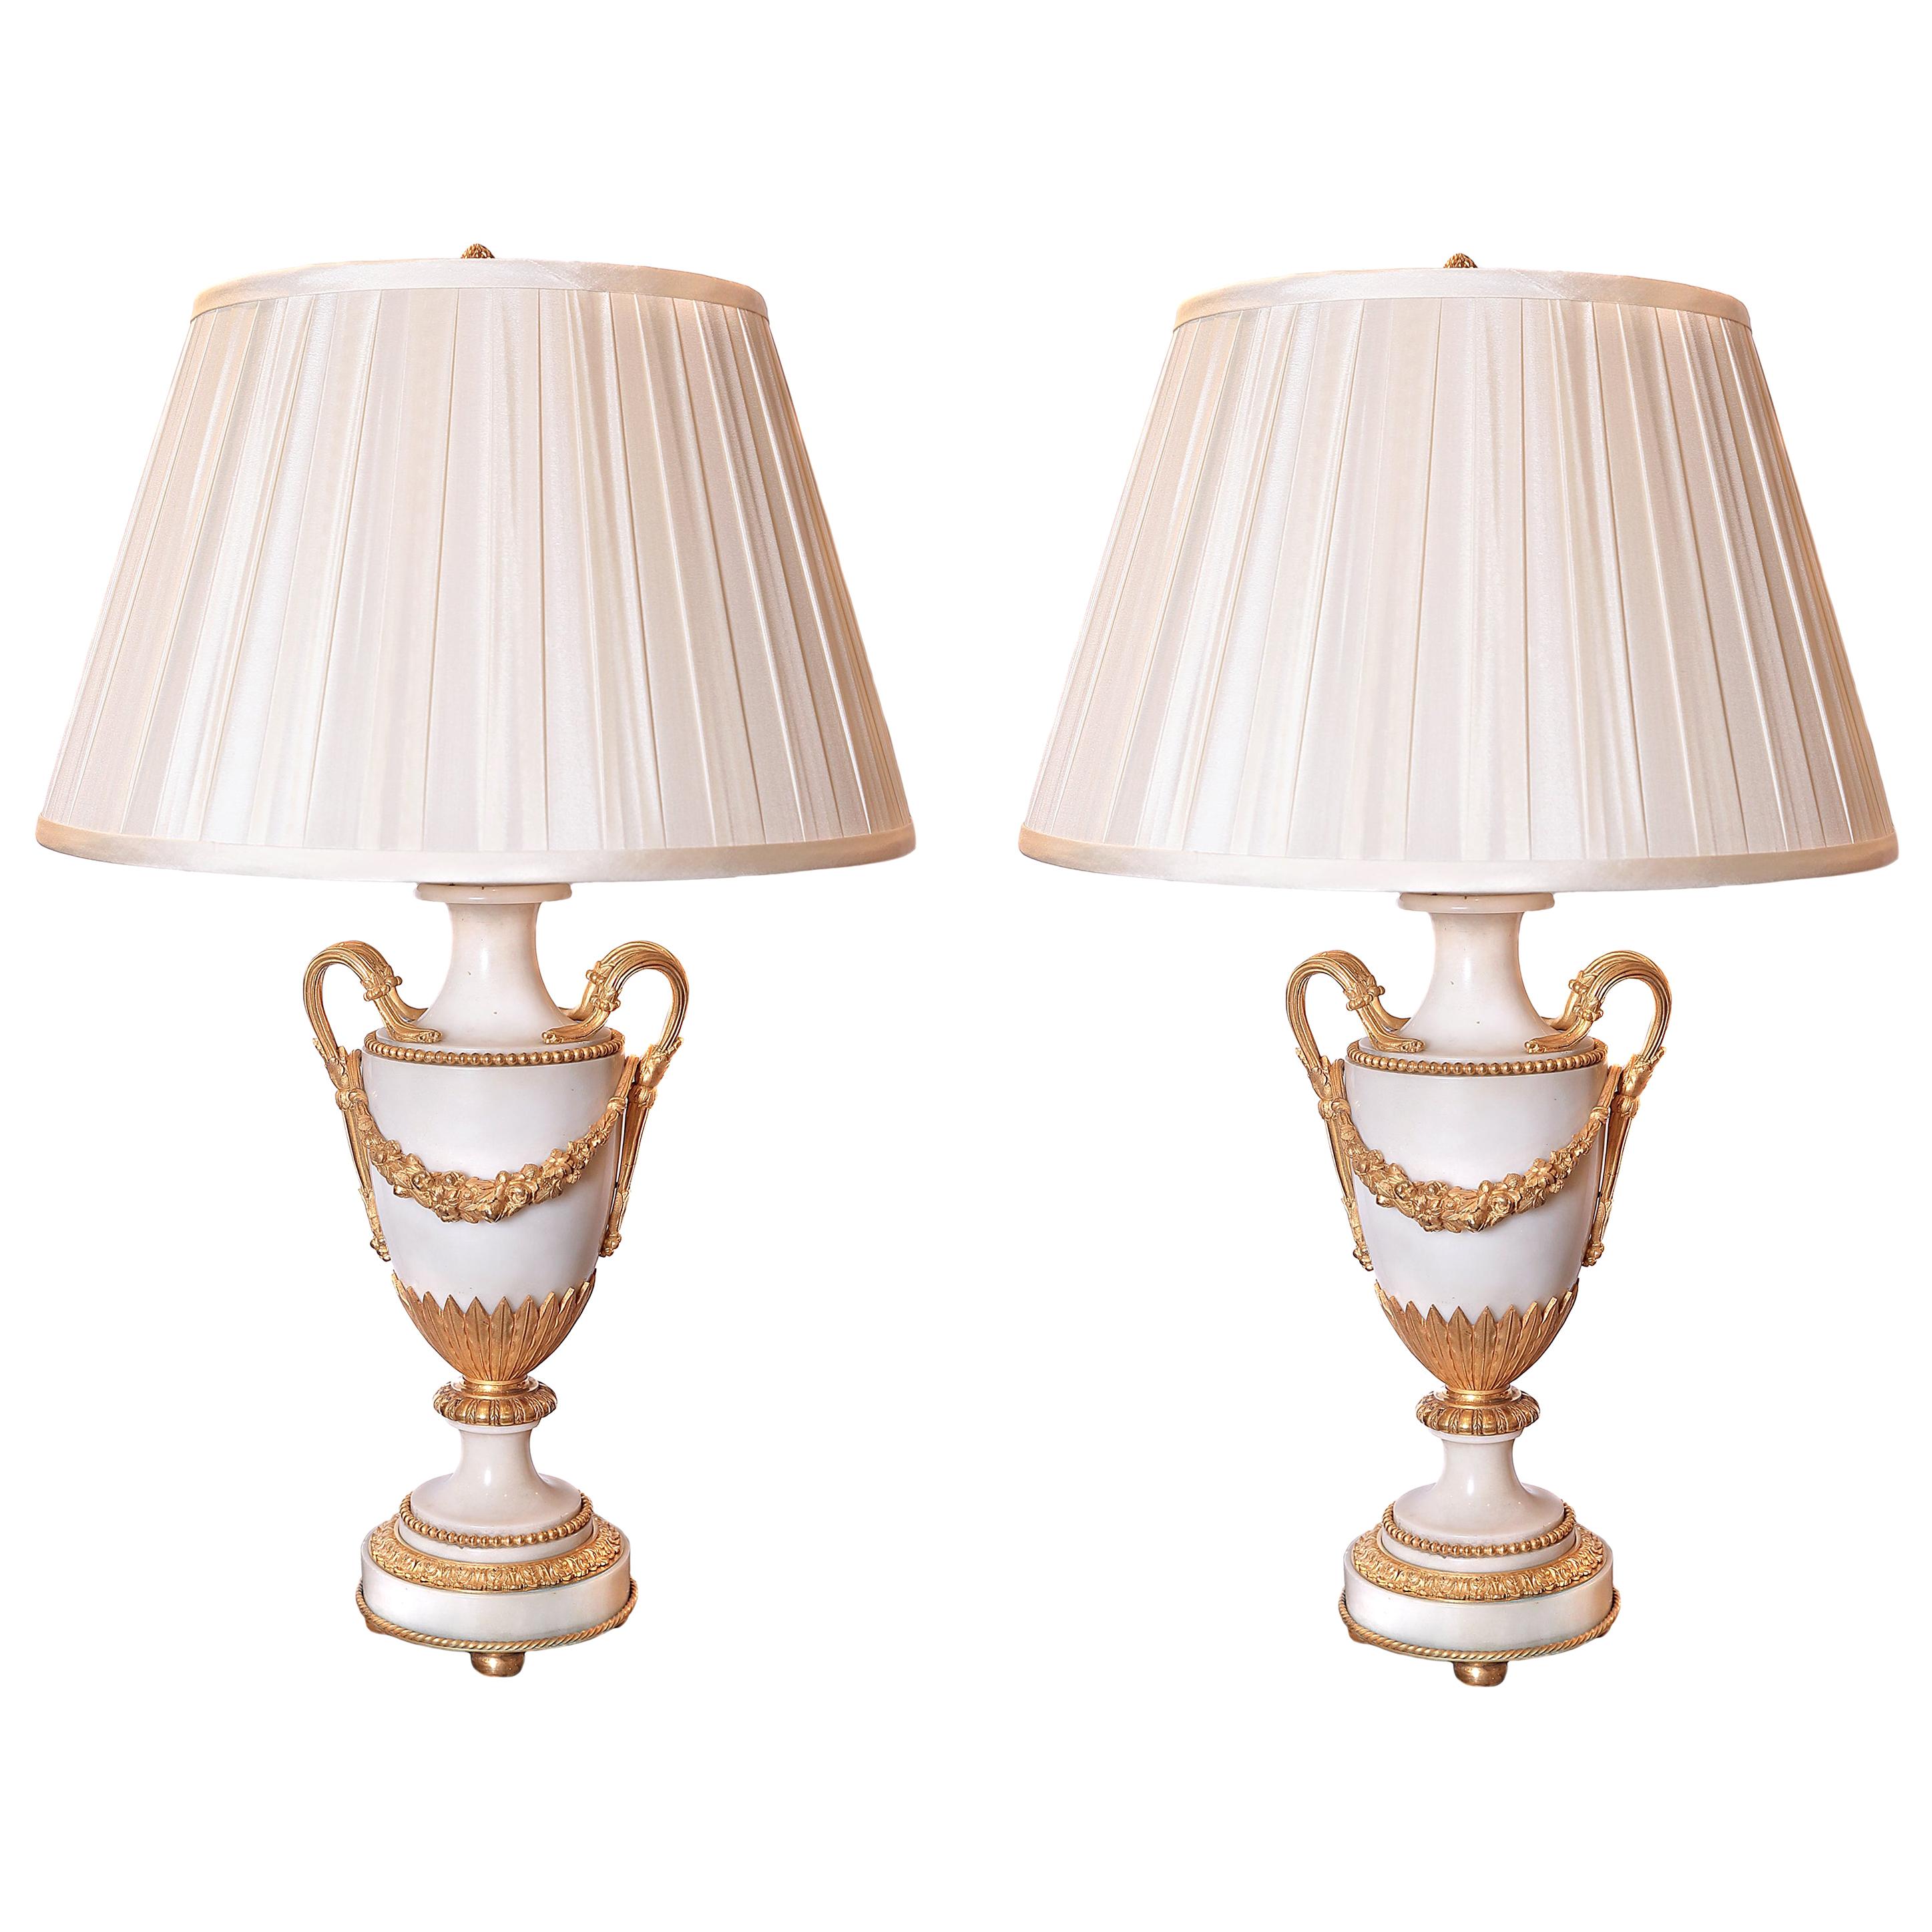 Pair of 19th Century French Louis XVI Carrara Marble and Gilt Bronze Lamps